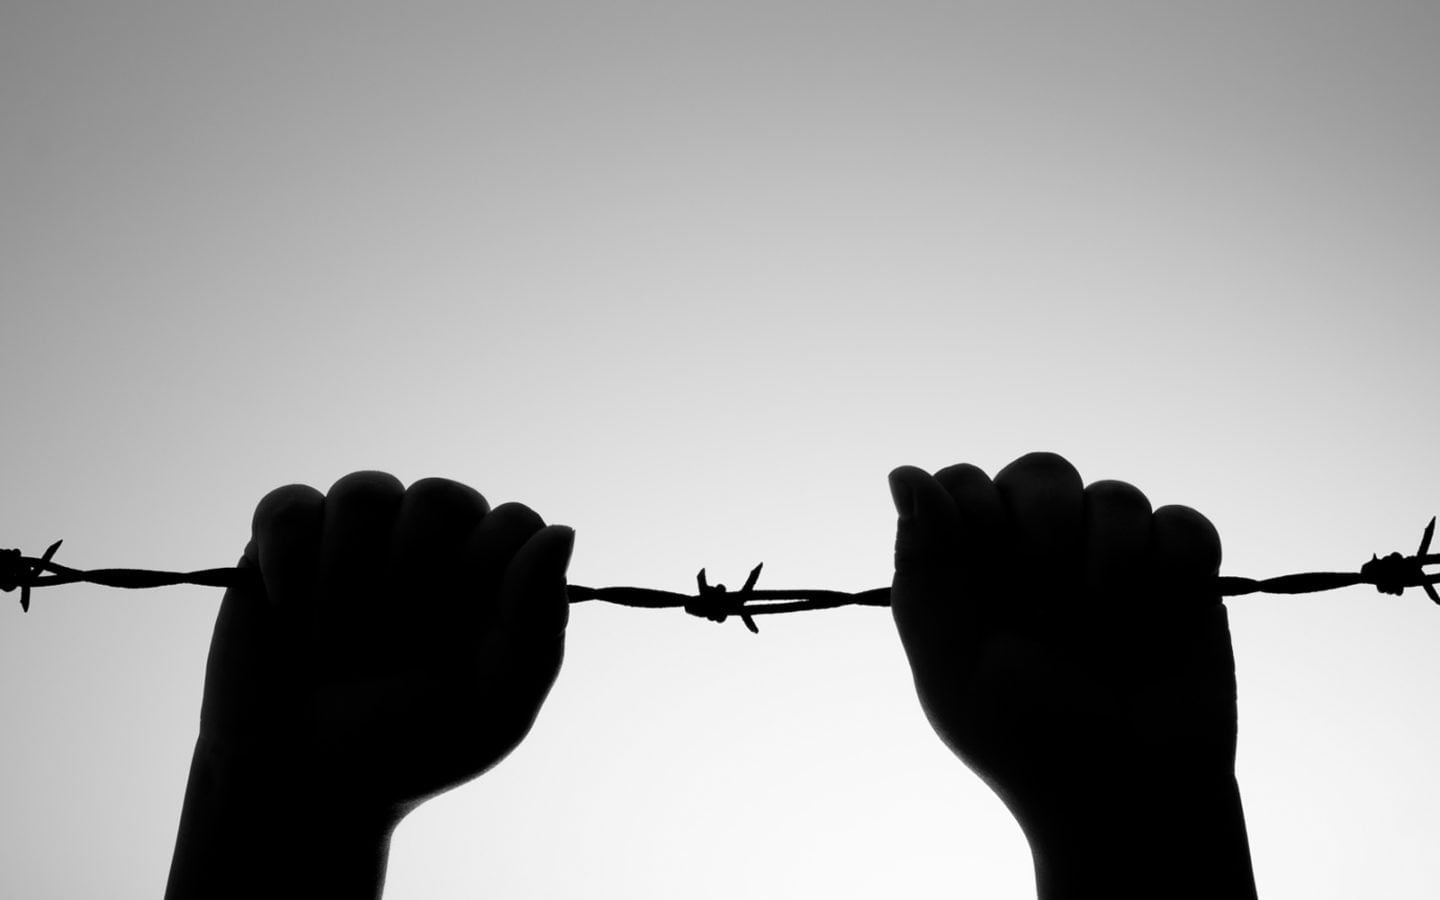 Silhouette of hands holding onto barbed wire